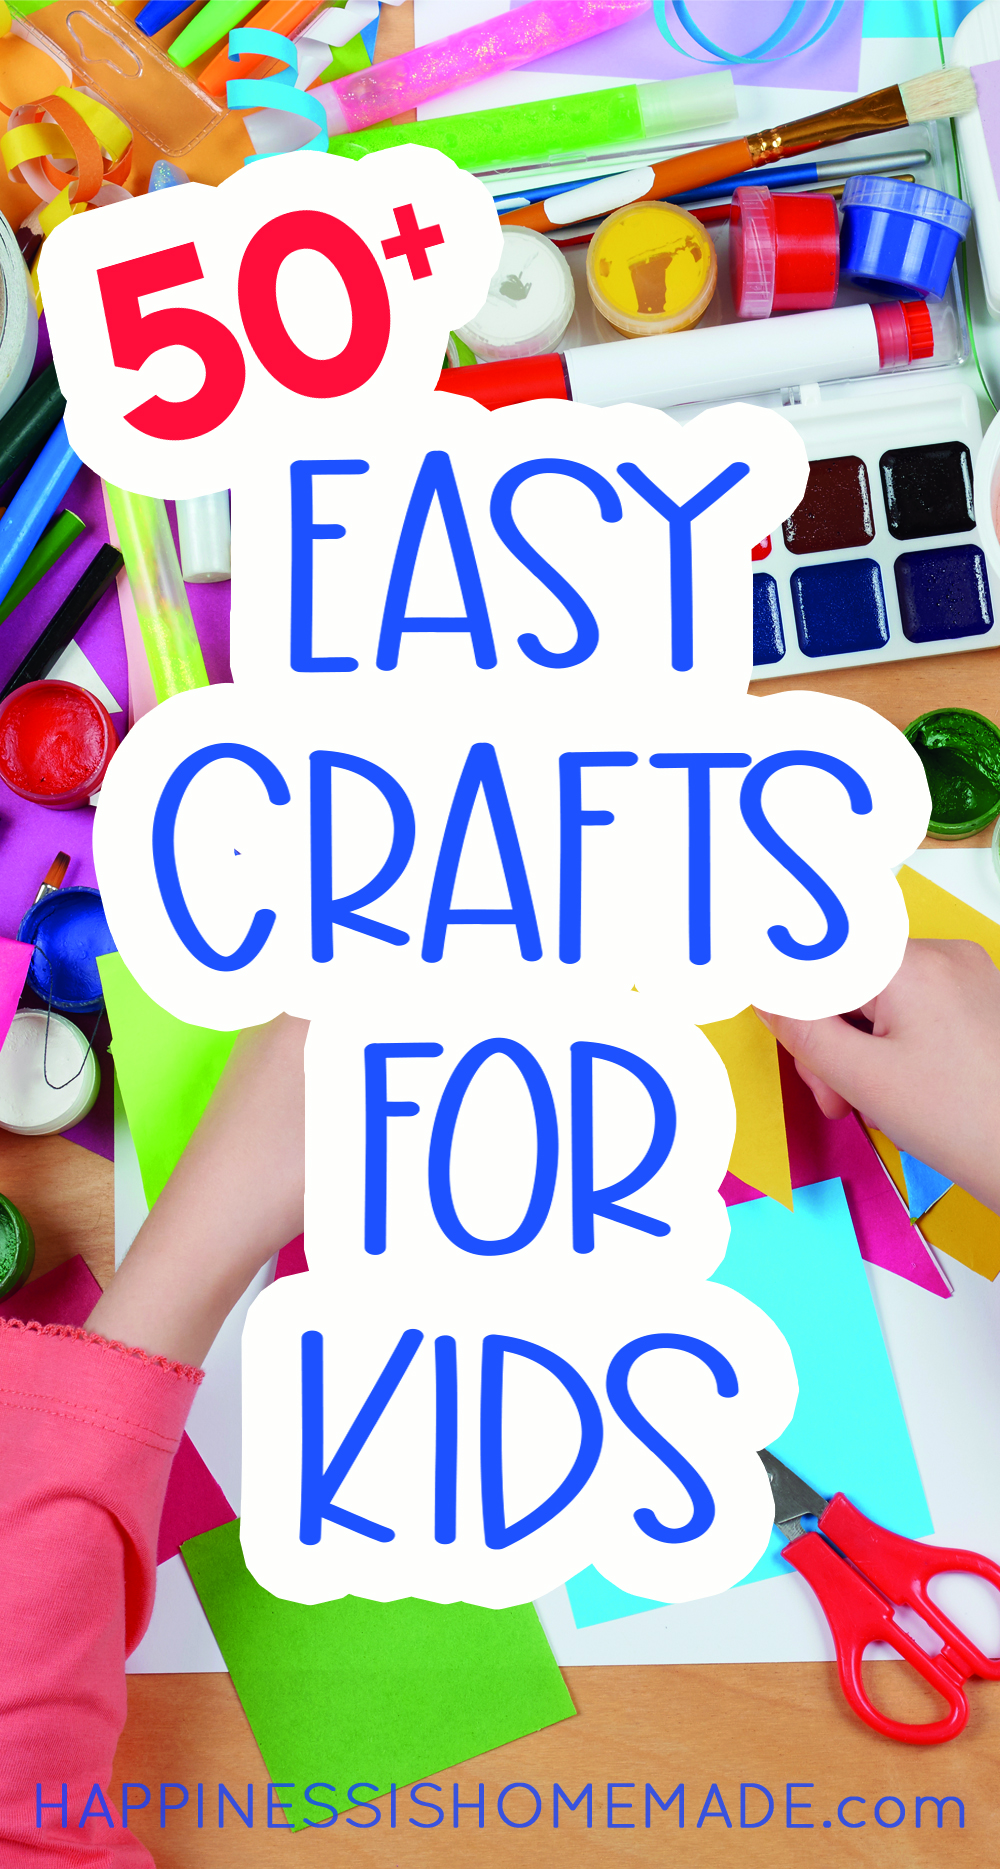 17 Fantastic Craft Ideas for Teens - Chaotically Yours